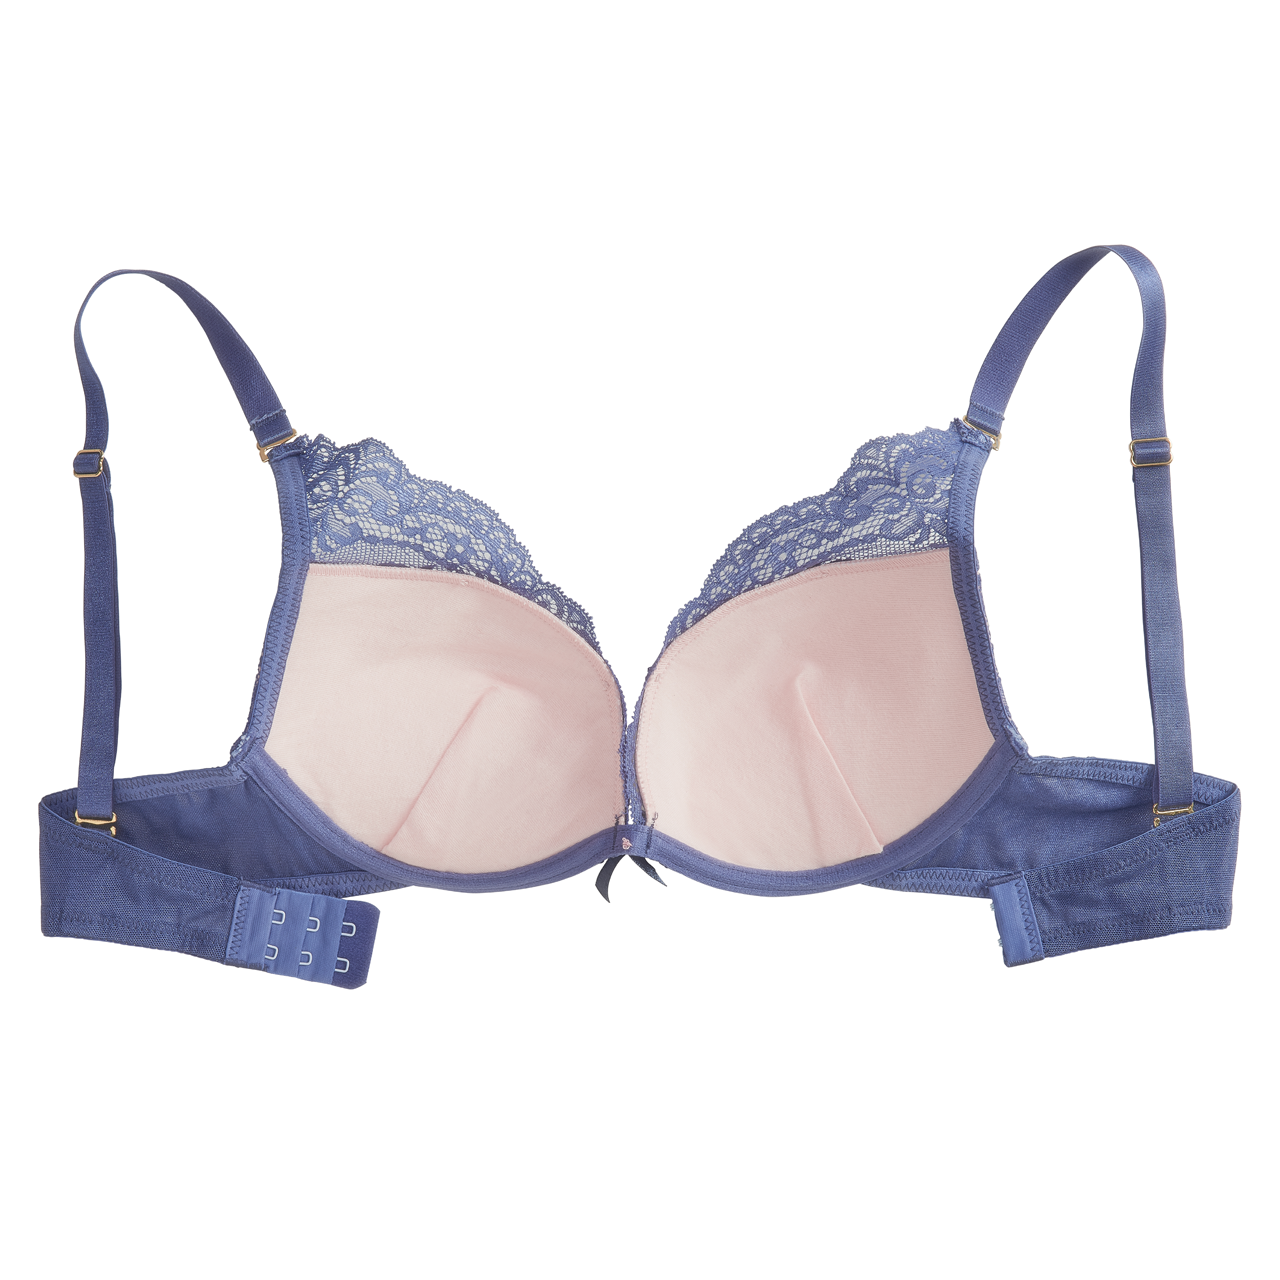 The Little Bra Company Lucia Lace Plunge Push-Up Bra